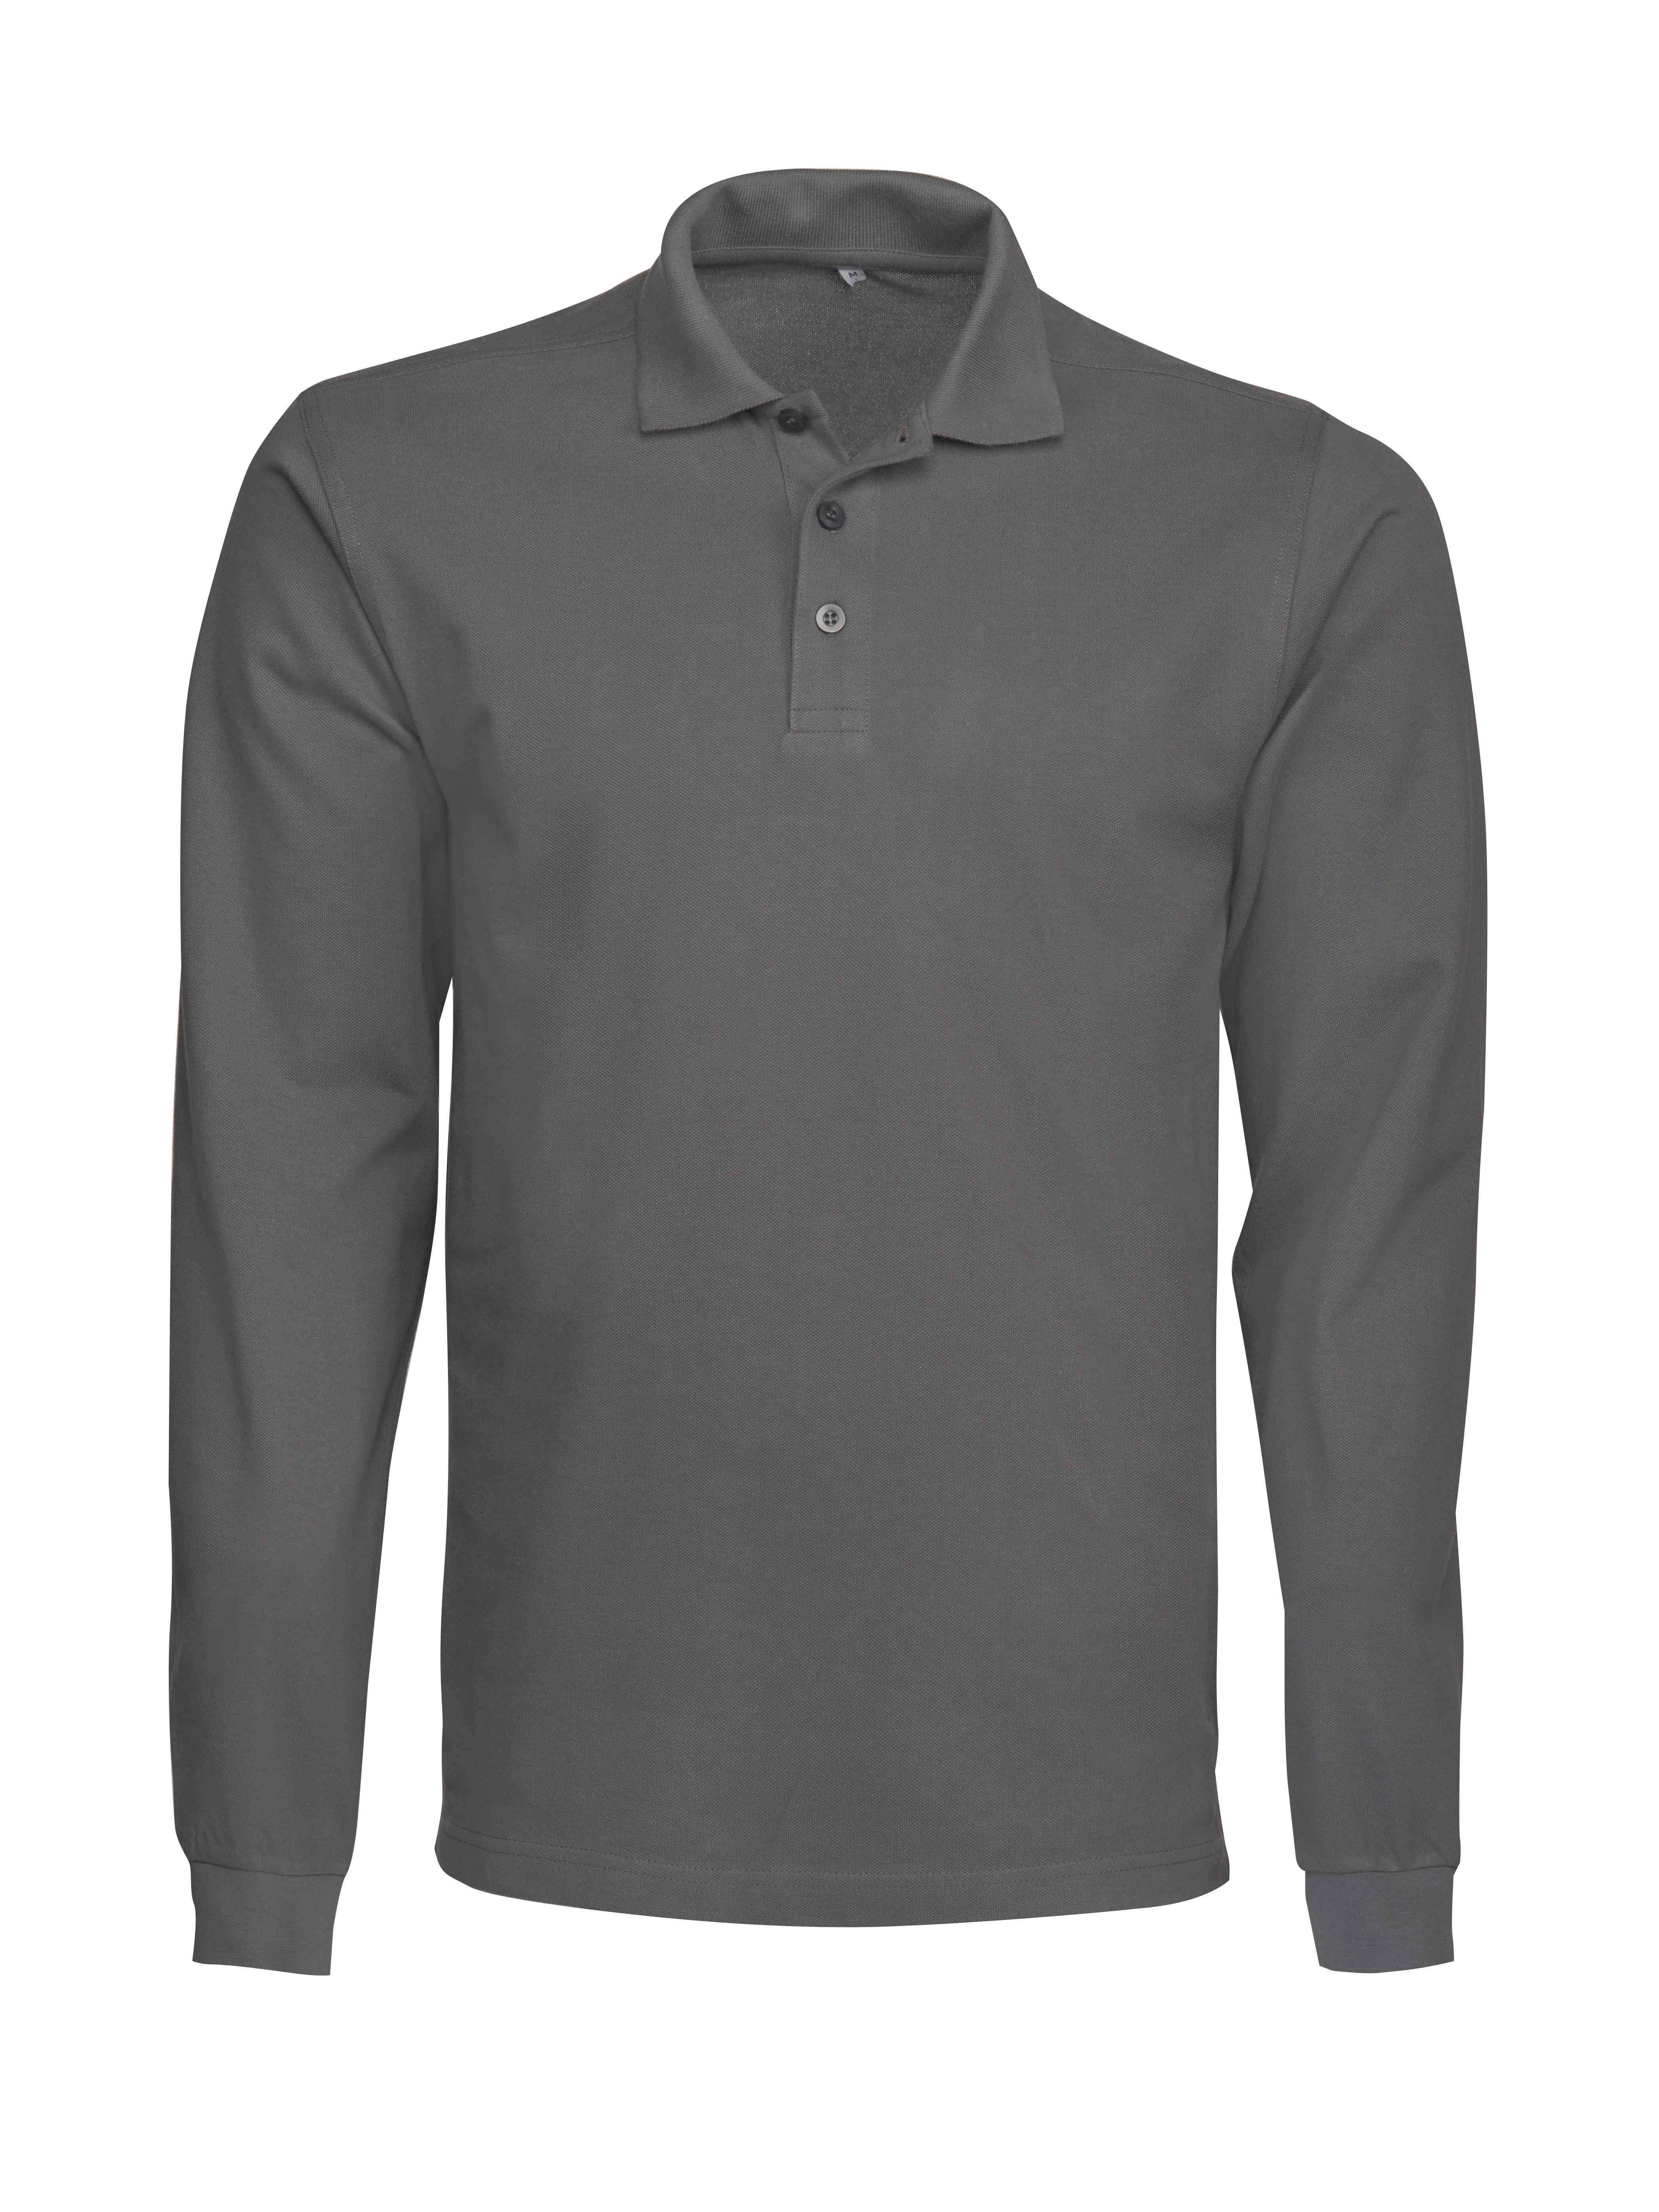 SURF POLO RSX L/S STEEL GREY PE-2265011-935-7